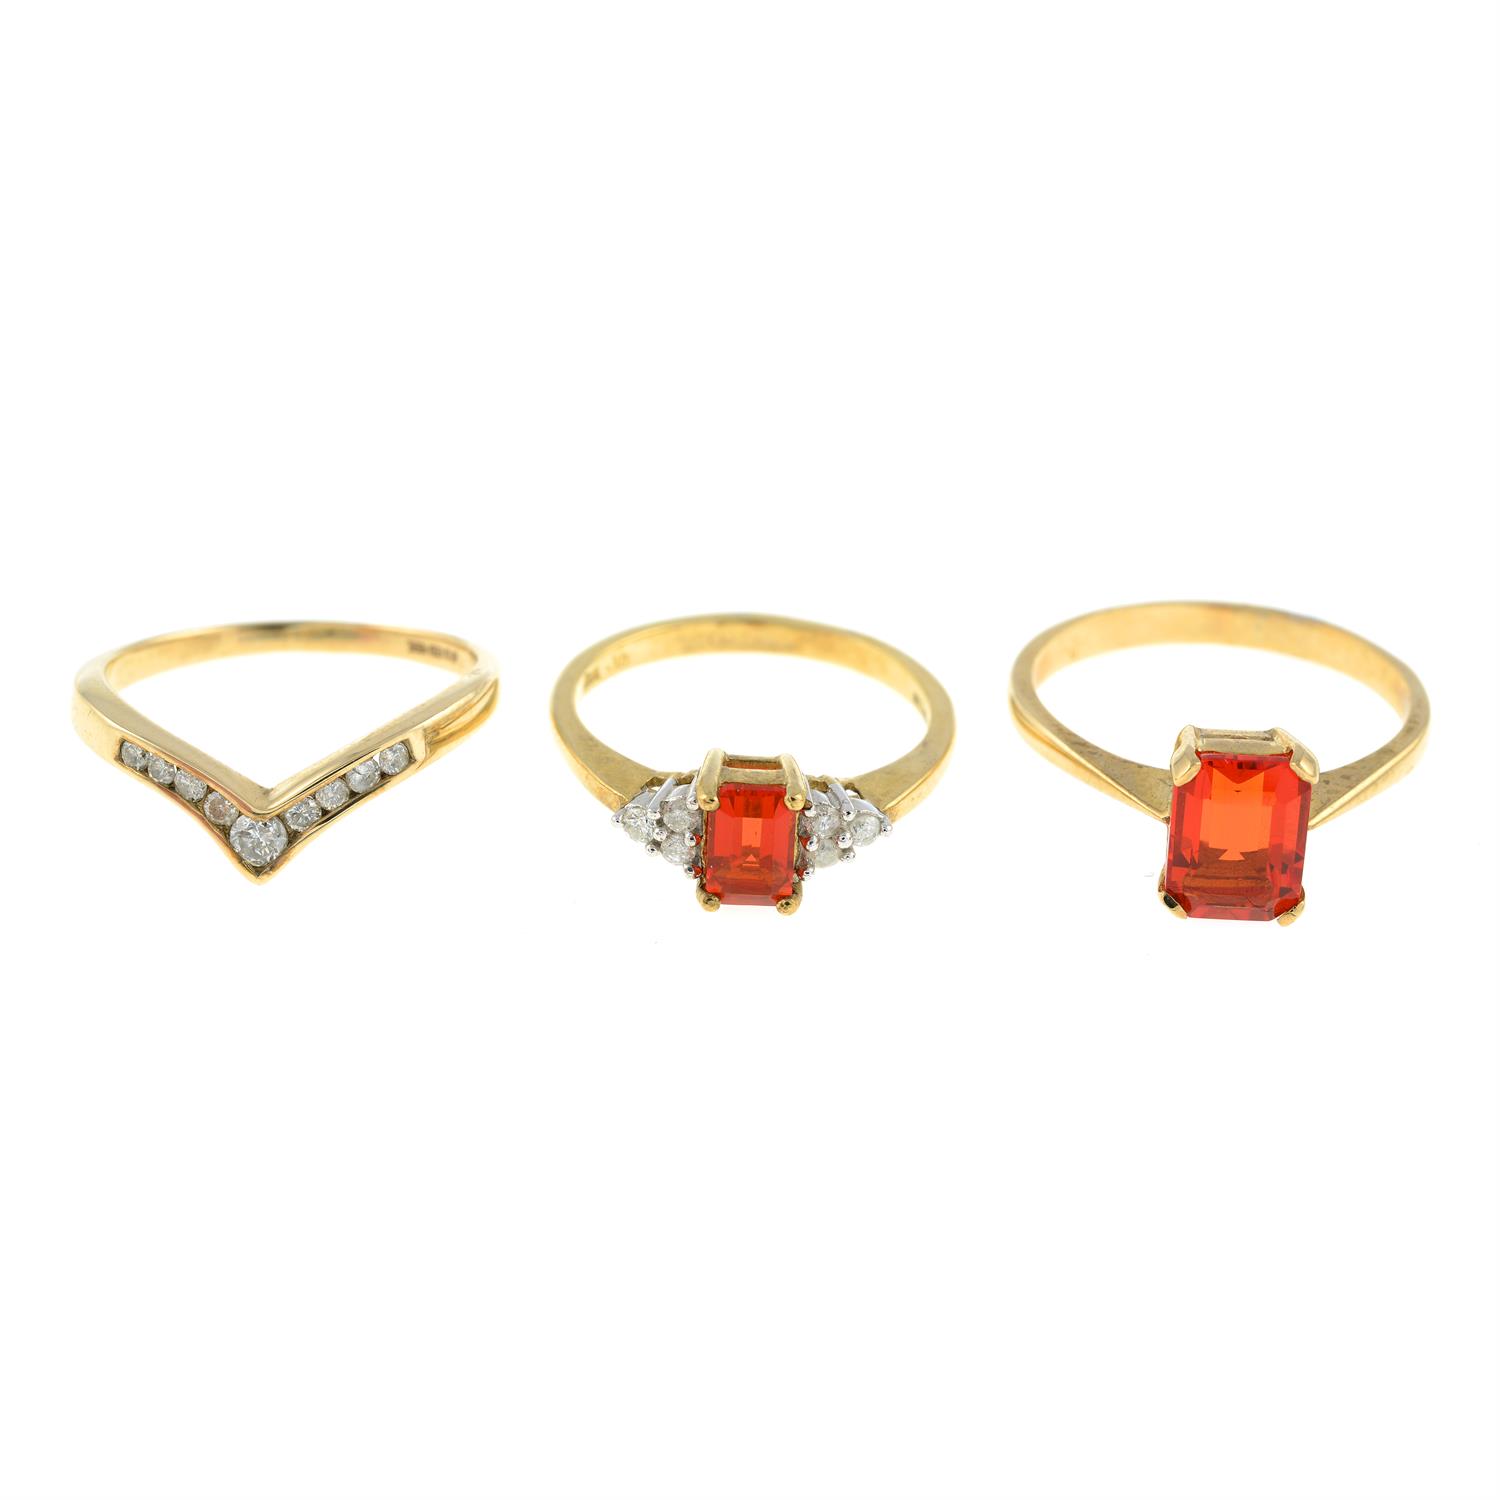 Three 9ct gold fire opal and diamond rings.